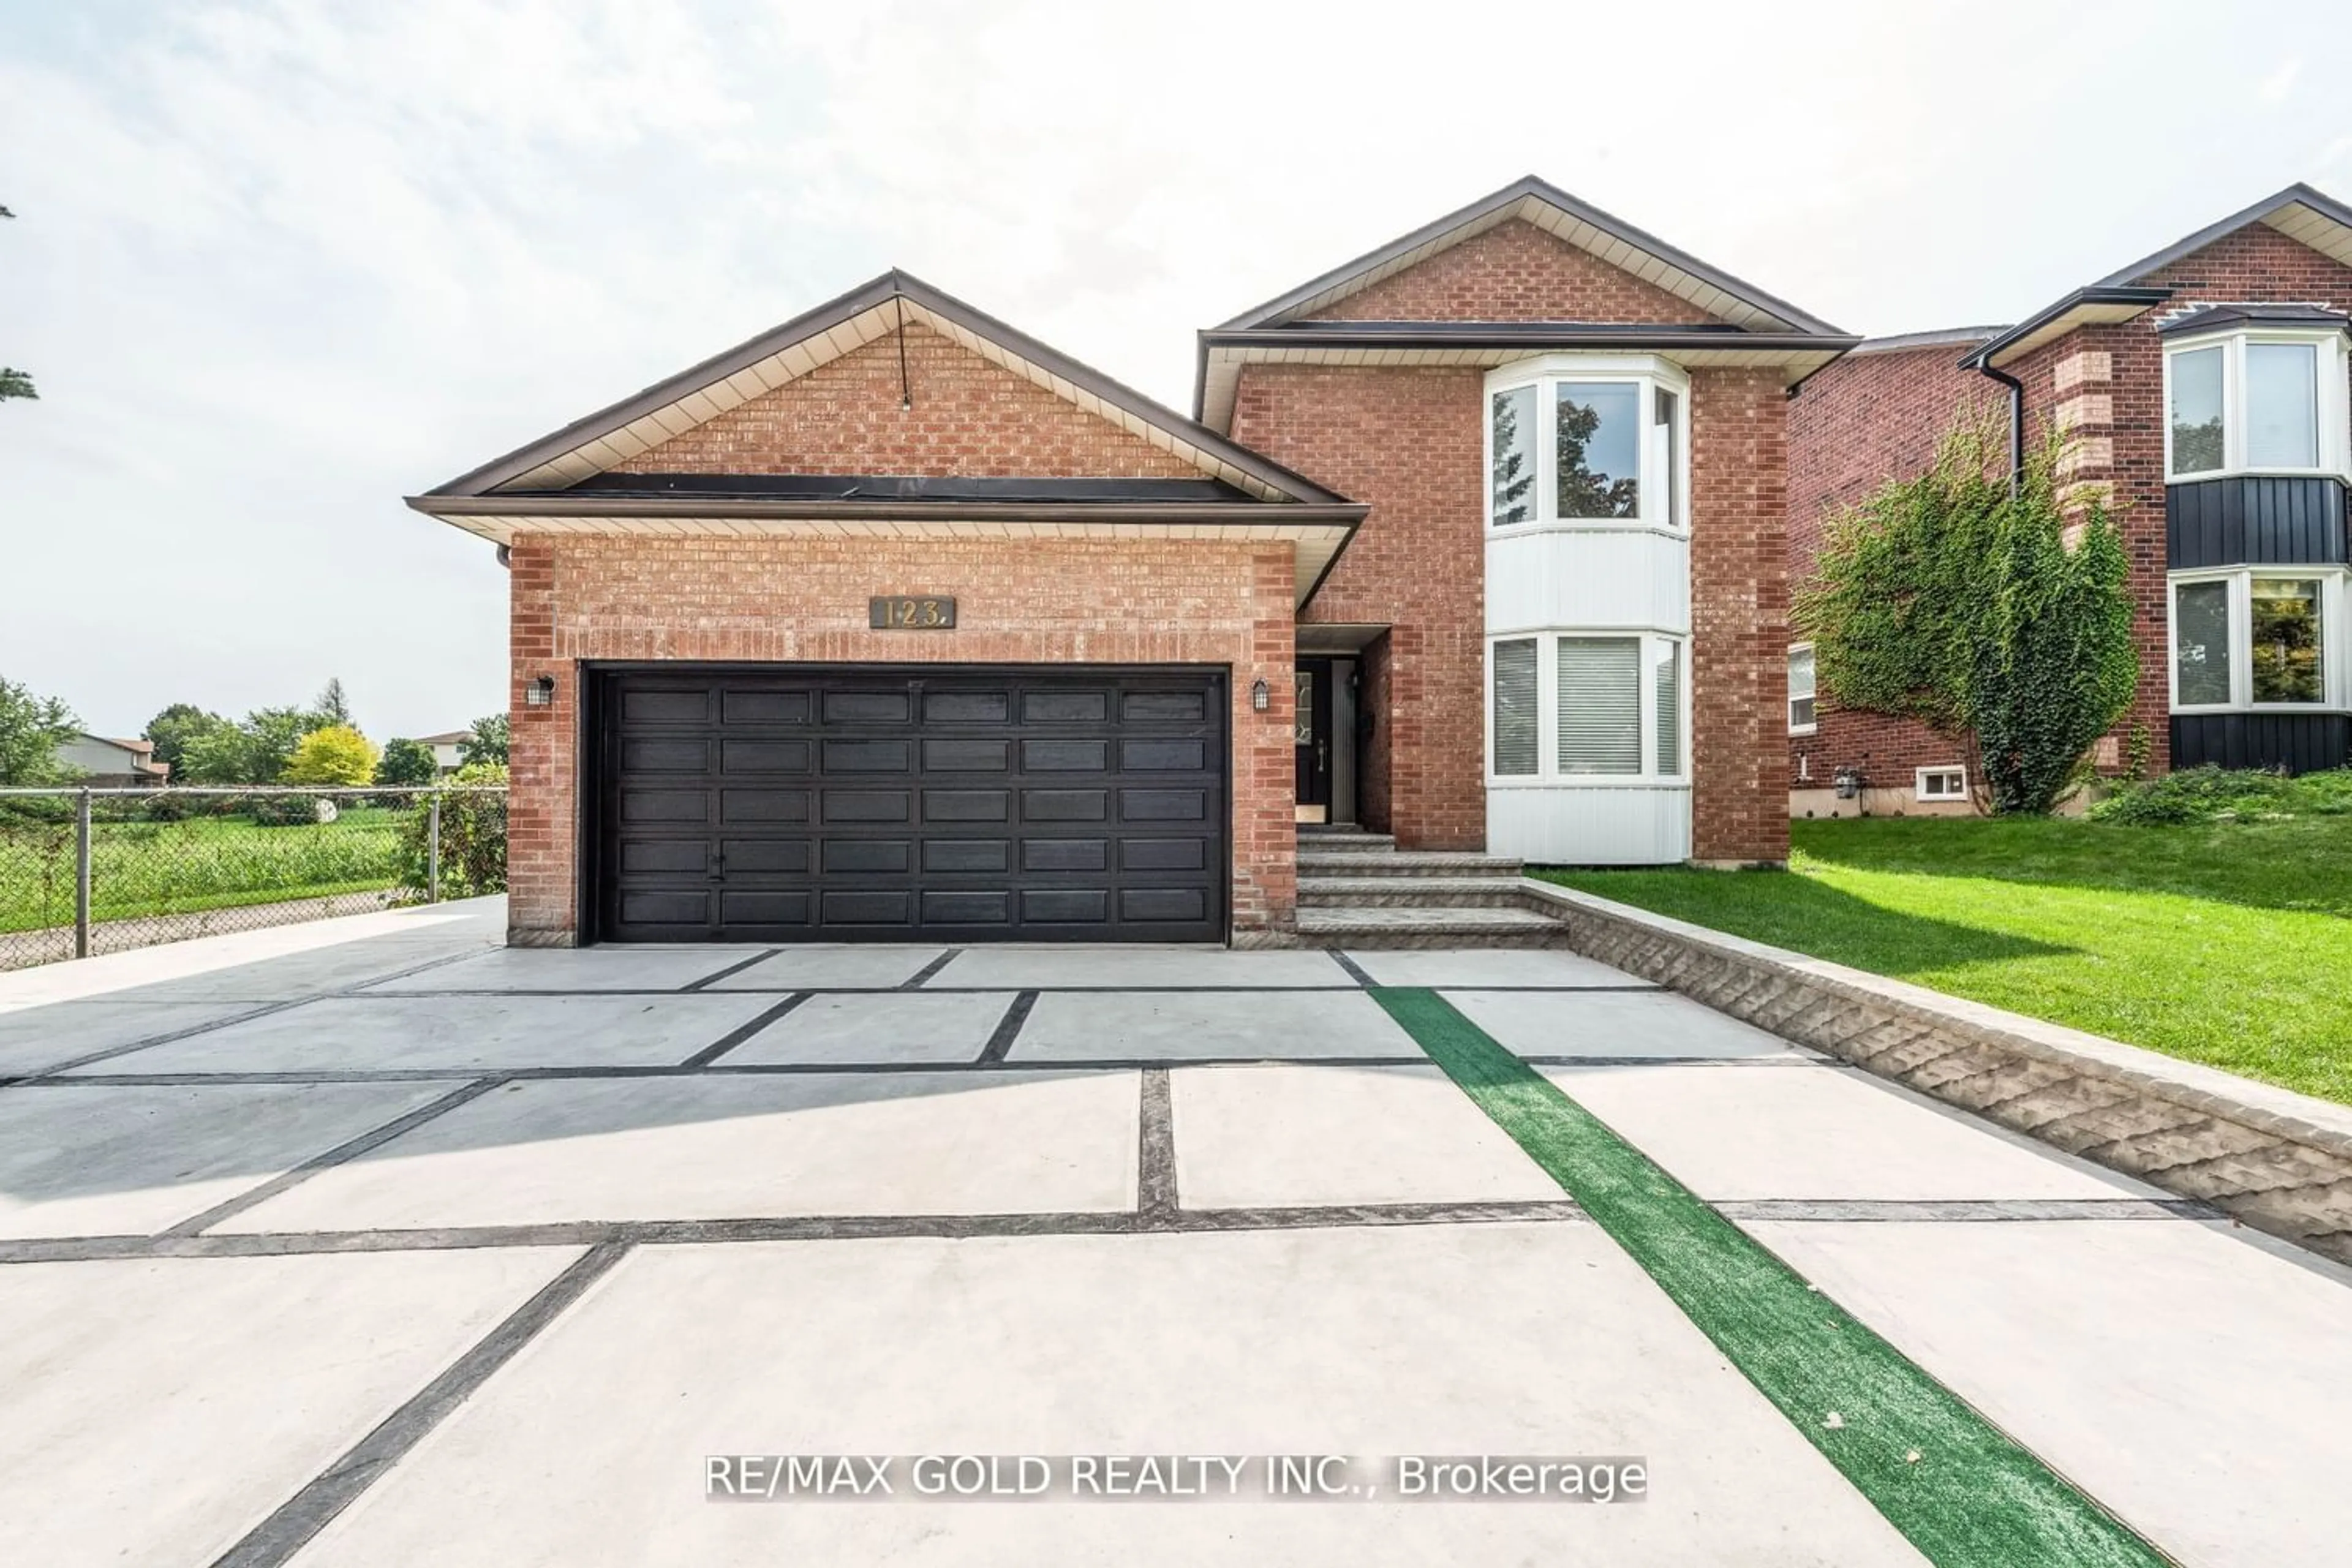 Home with brick exterior material for 123 Meadow Dr, Orangeville Ontario L9W 4J7